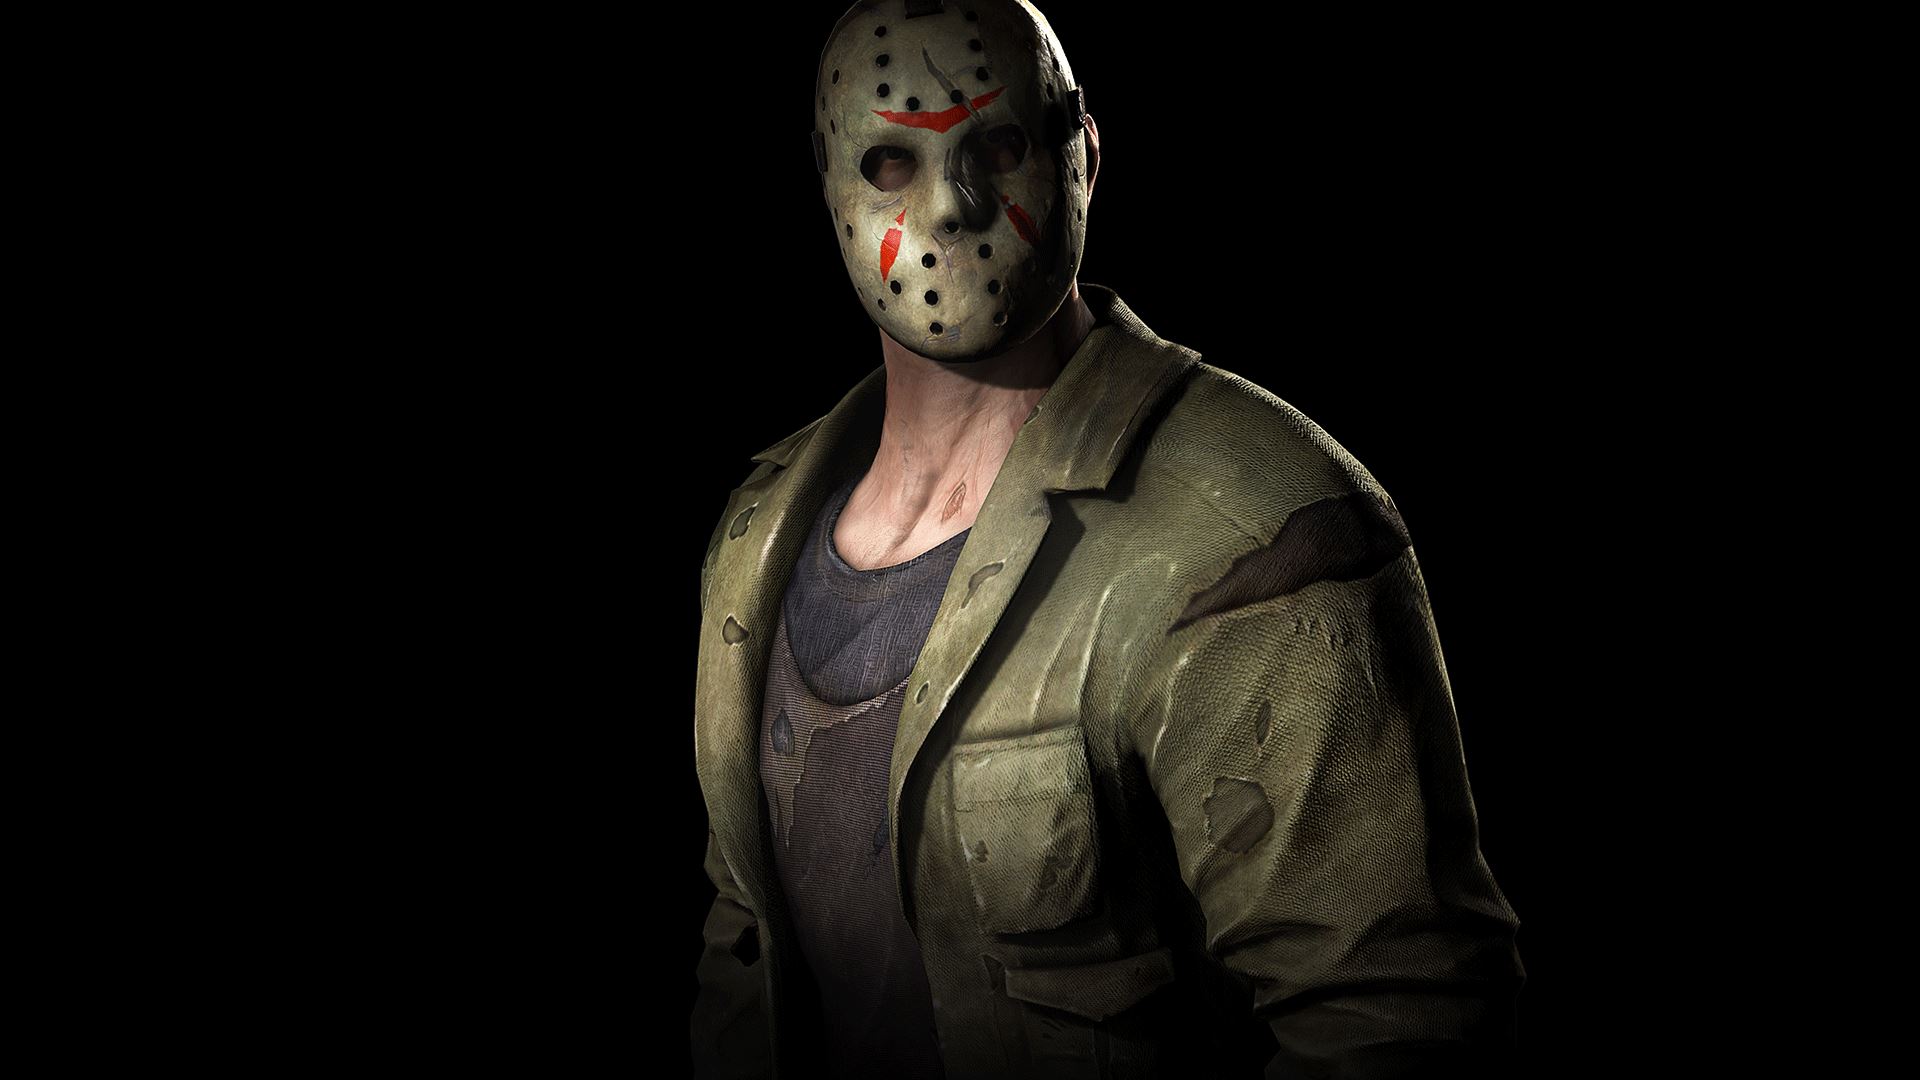 The iconic Jason Voorhes